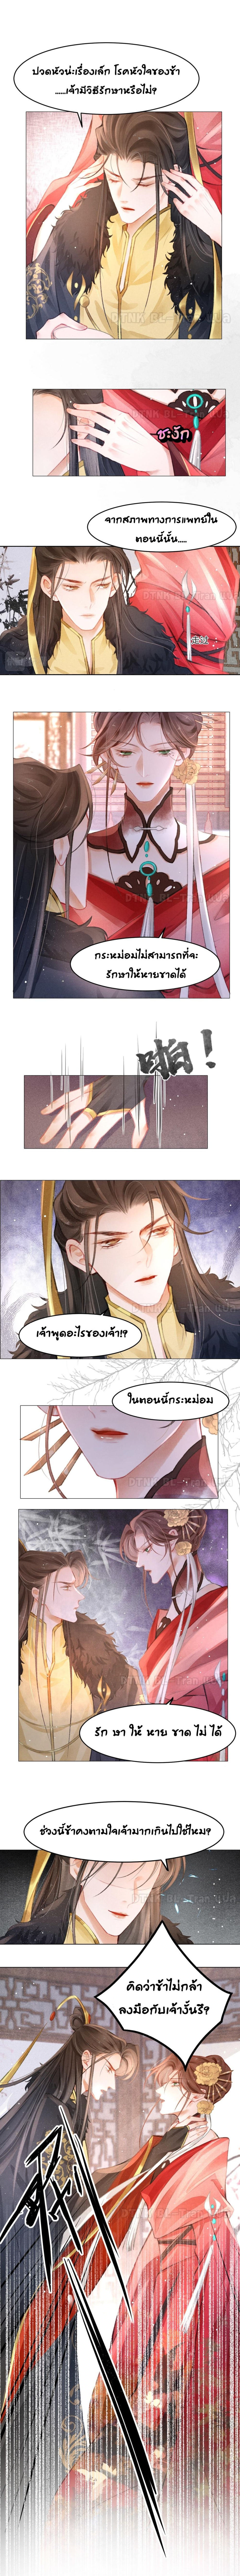 The Lonely King - หน้า 9